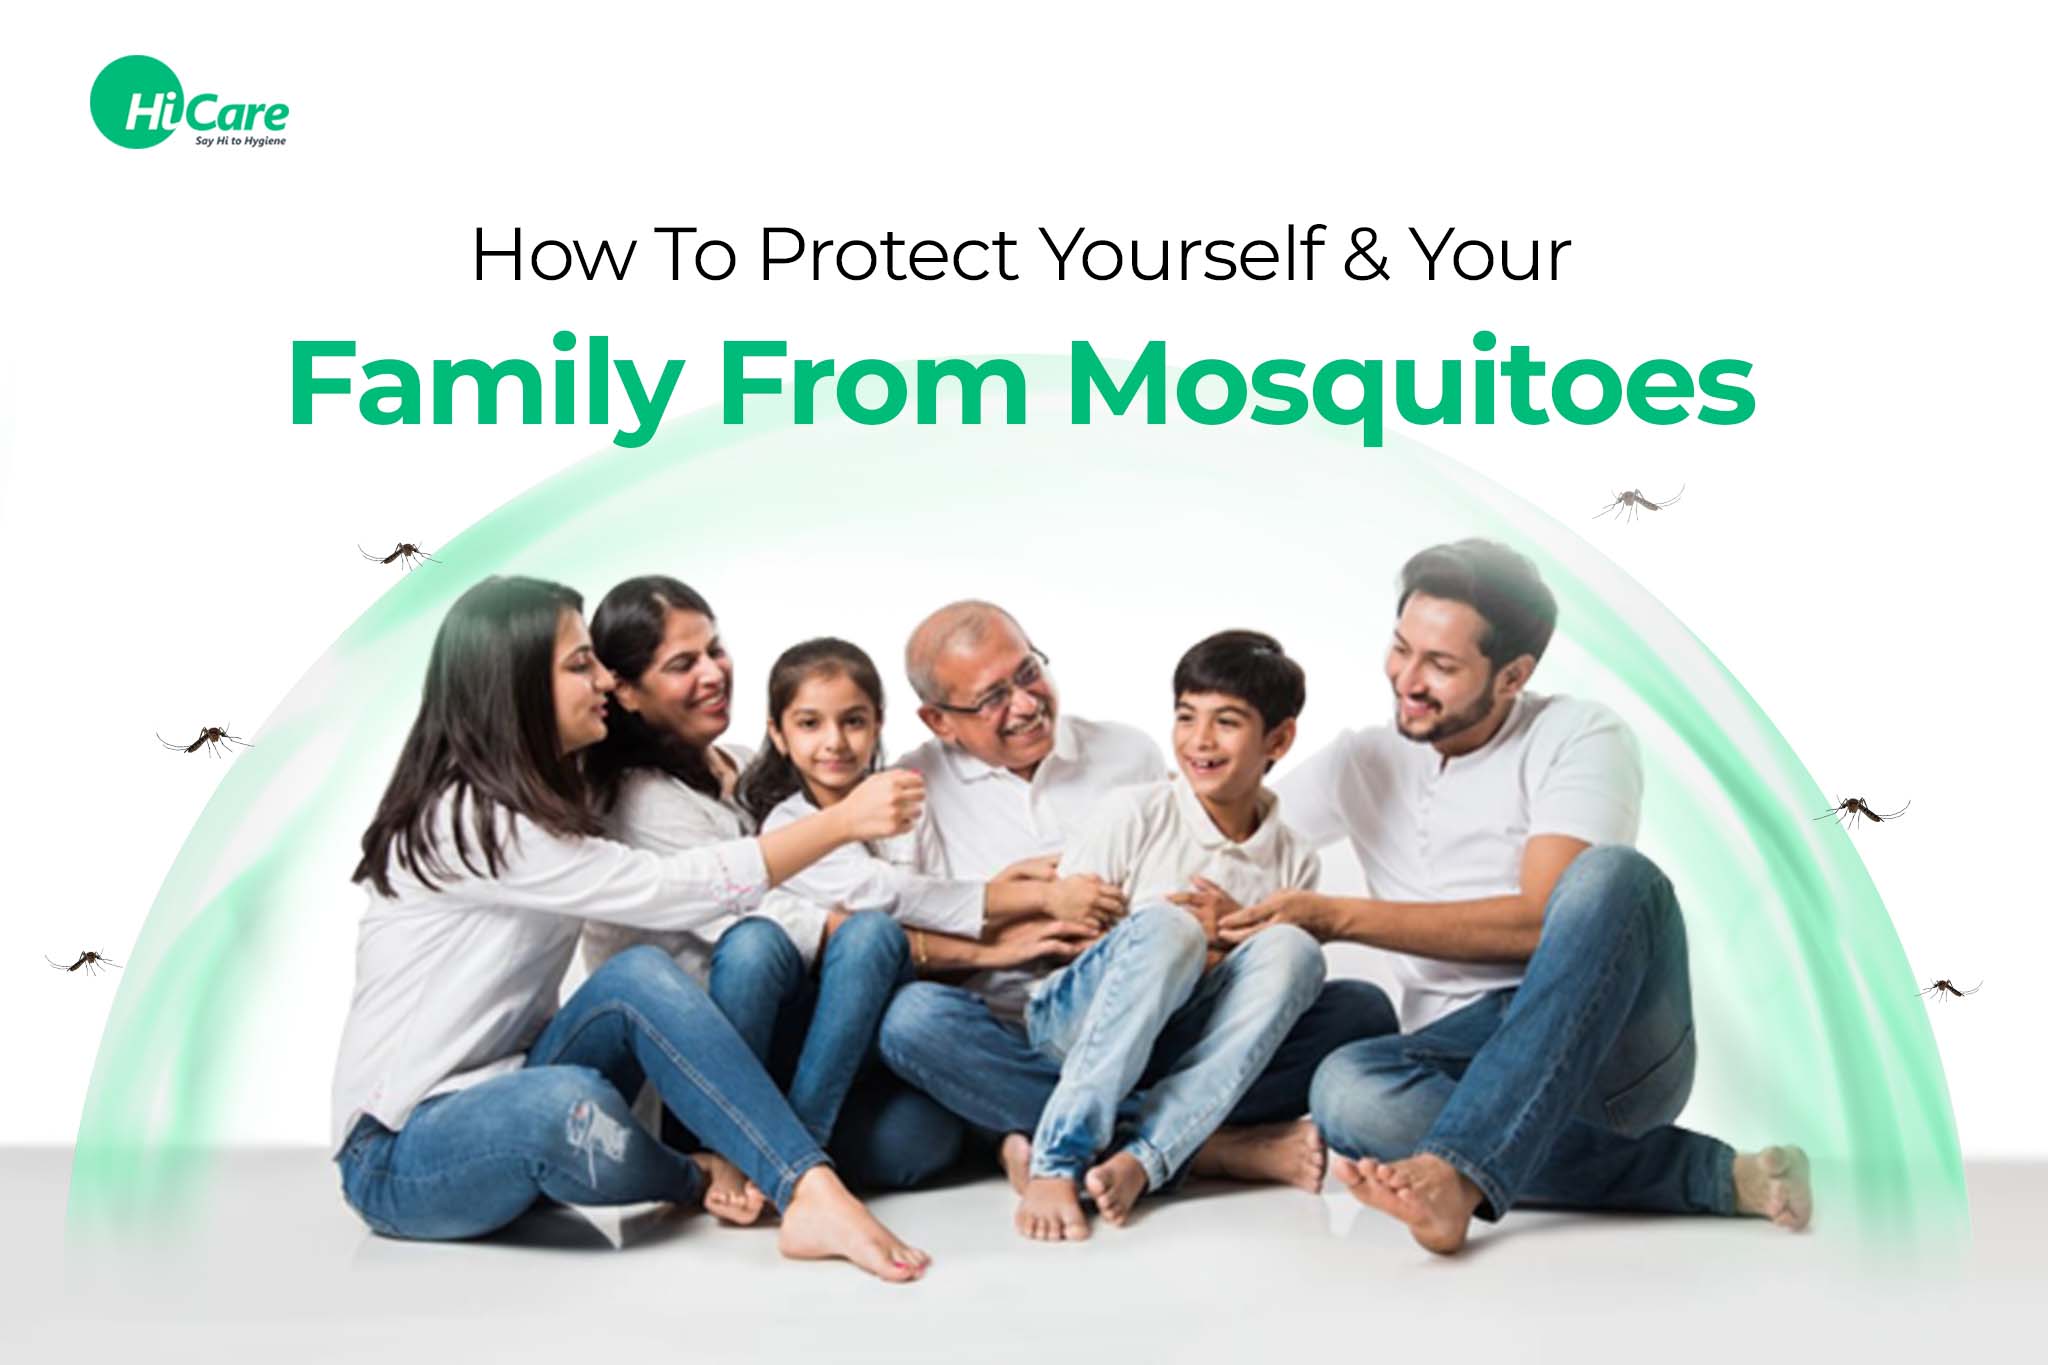 How To Protect Yourself & Your Family From Mosquitoes?